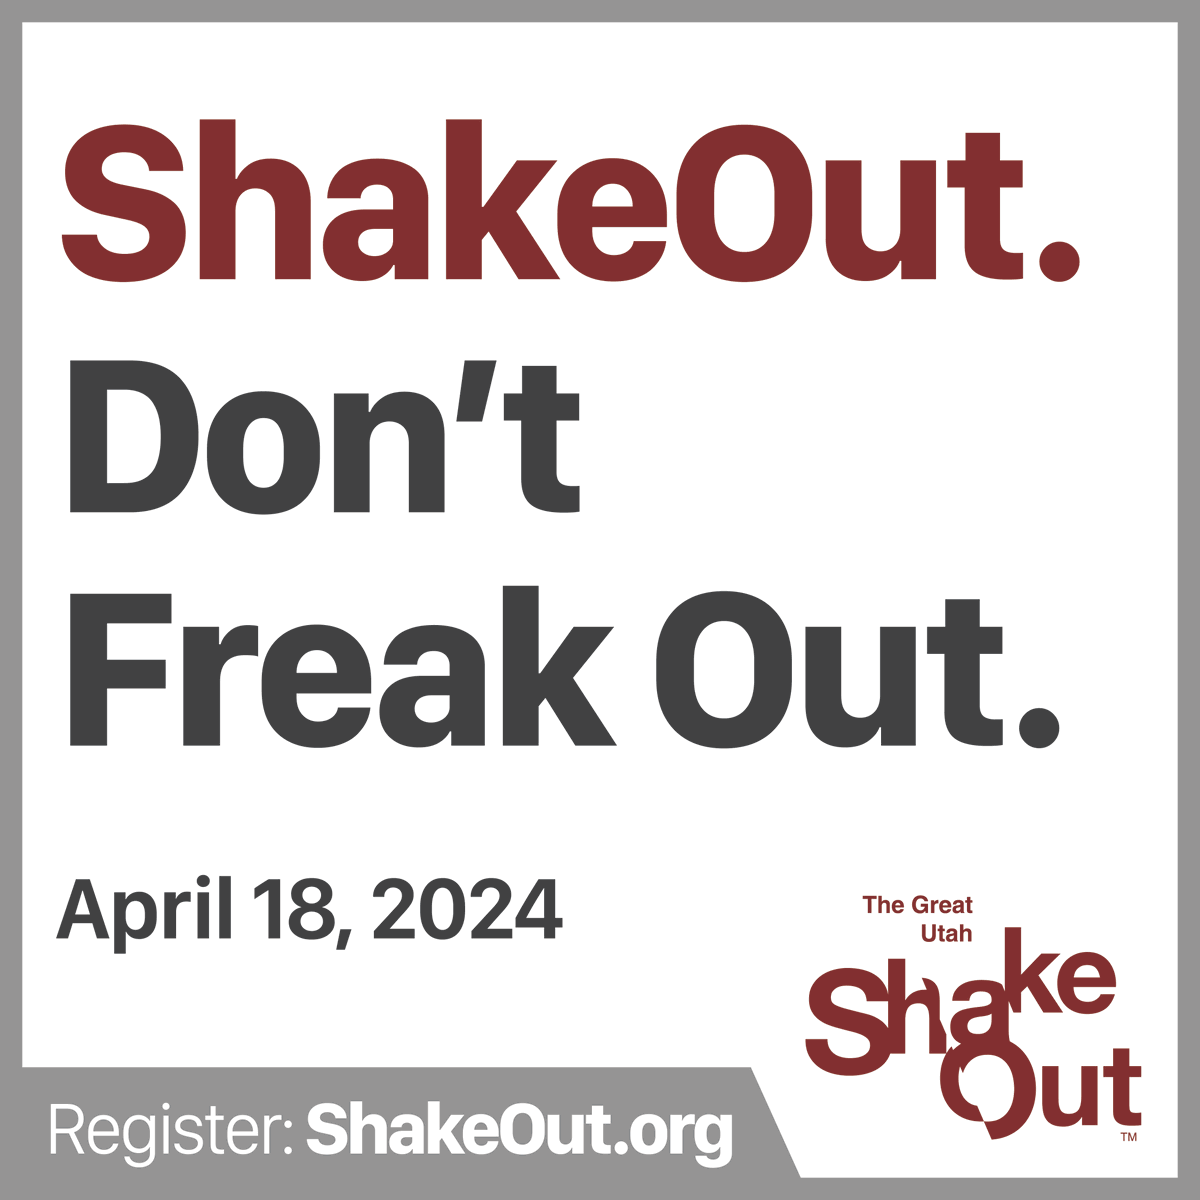 Don't forget to drop, cover, and hold on today at 10:15 am because it's the Great Utah Shakeout! Let's ensure we're all prepared for any seismic event. Join us as we participate in the largest earthquake drill in the state. Register here–shakeout.org/utah #ShakeOut2024